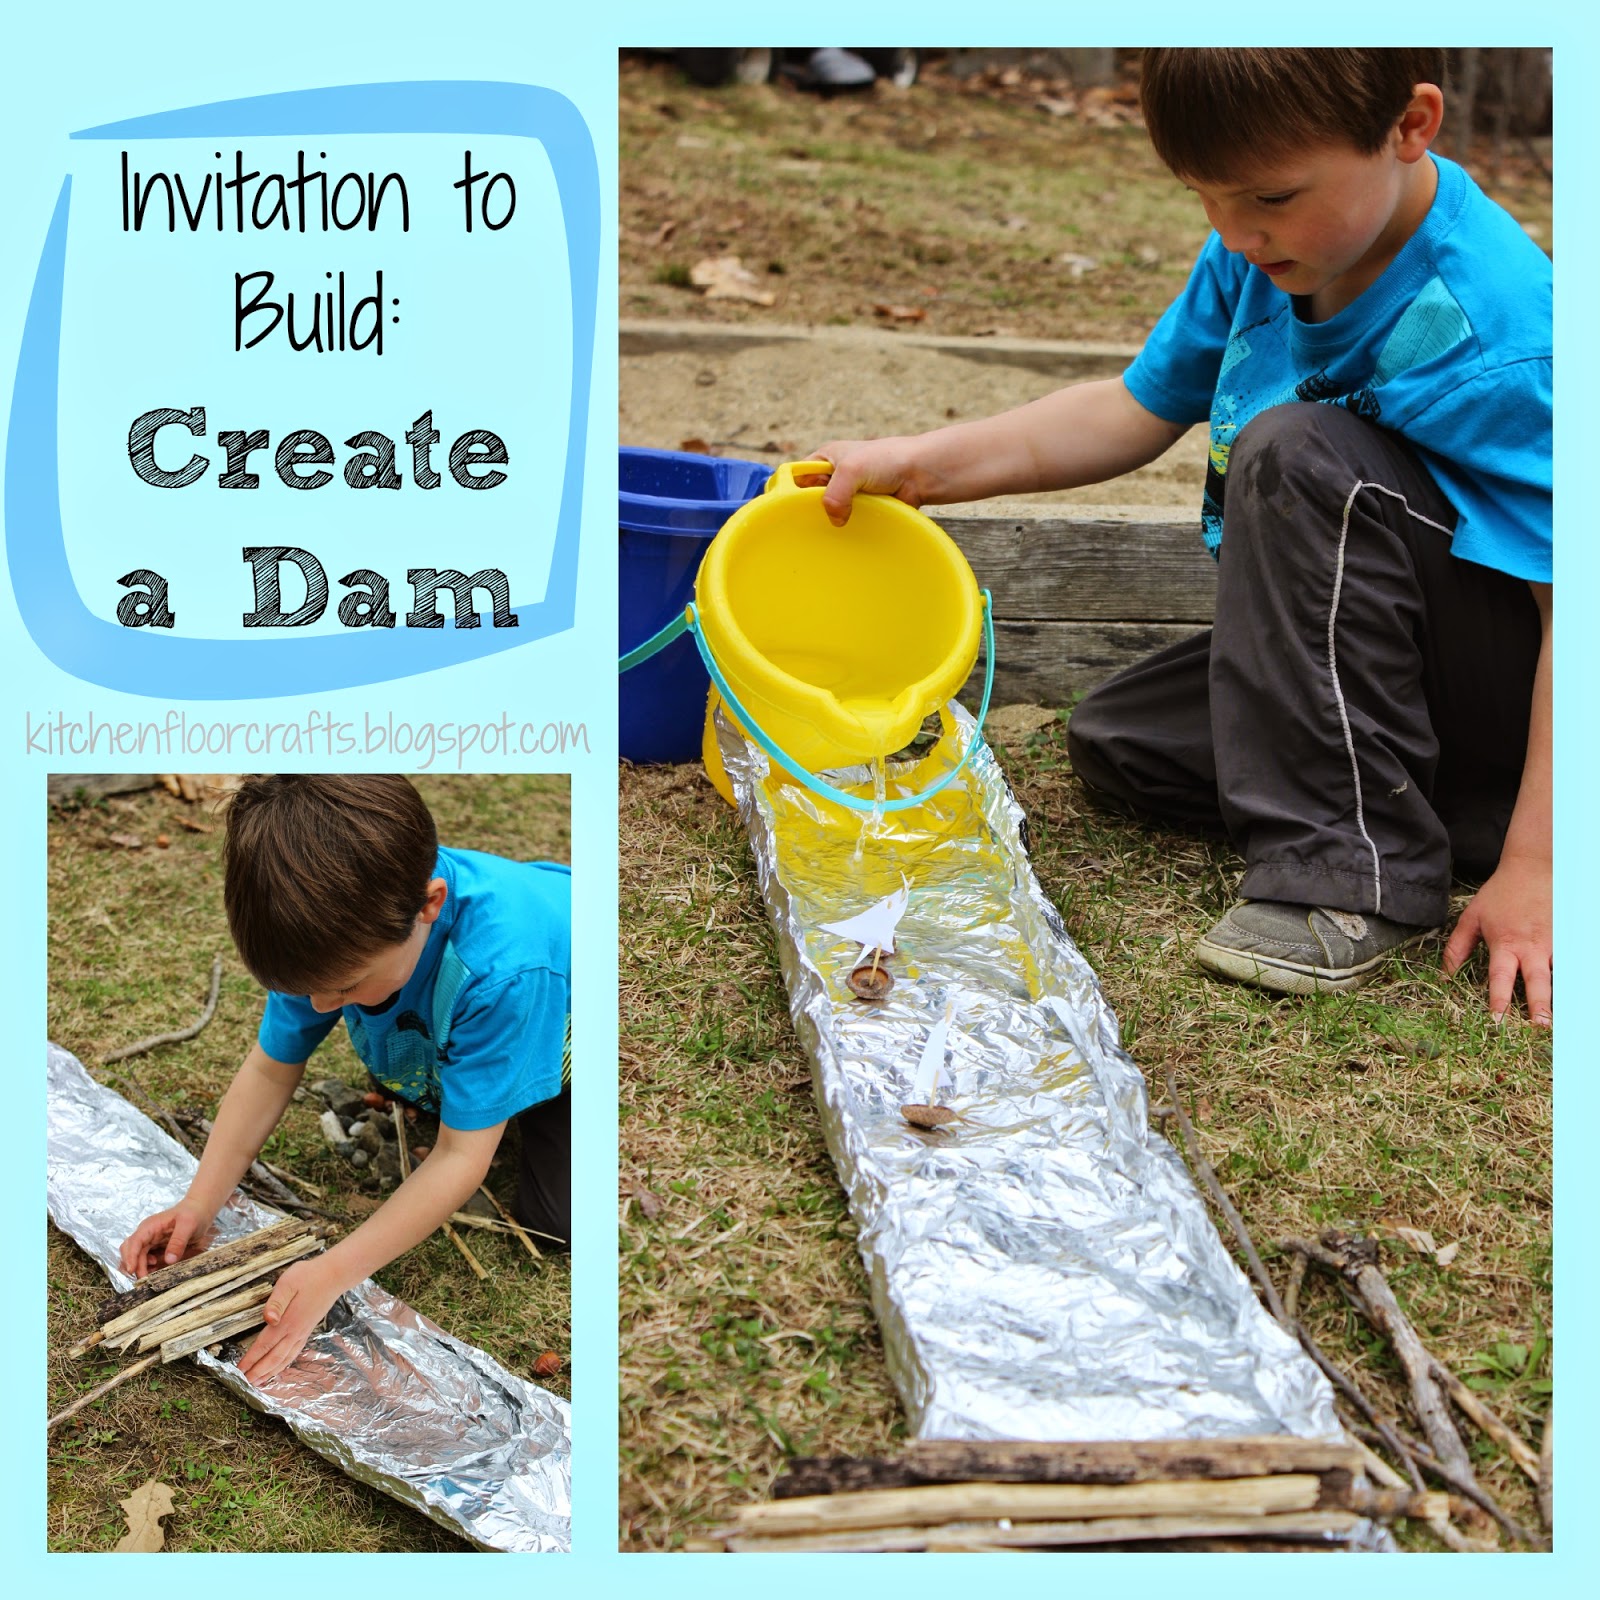 magnet receive Humility Kitchen Floor Crafts: Invitation to Build: Create a Dam